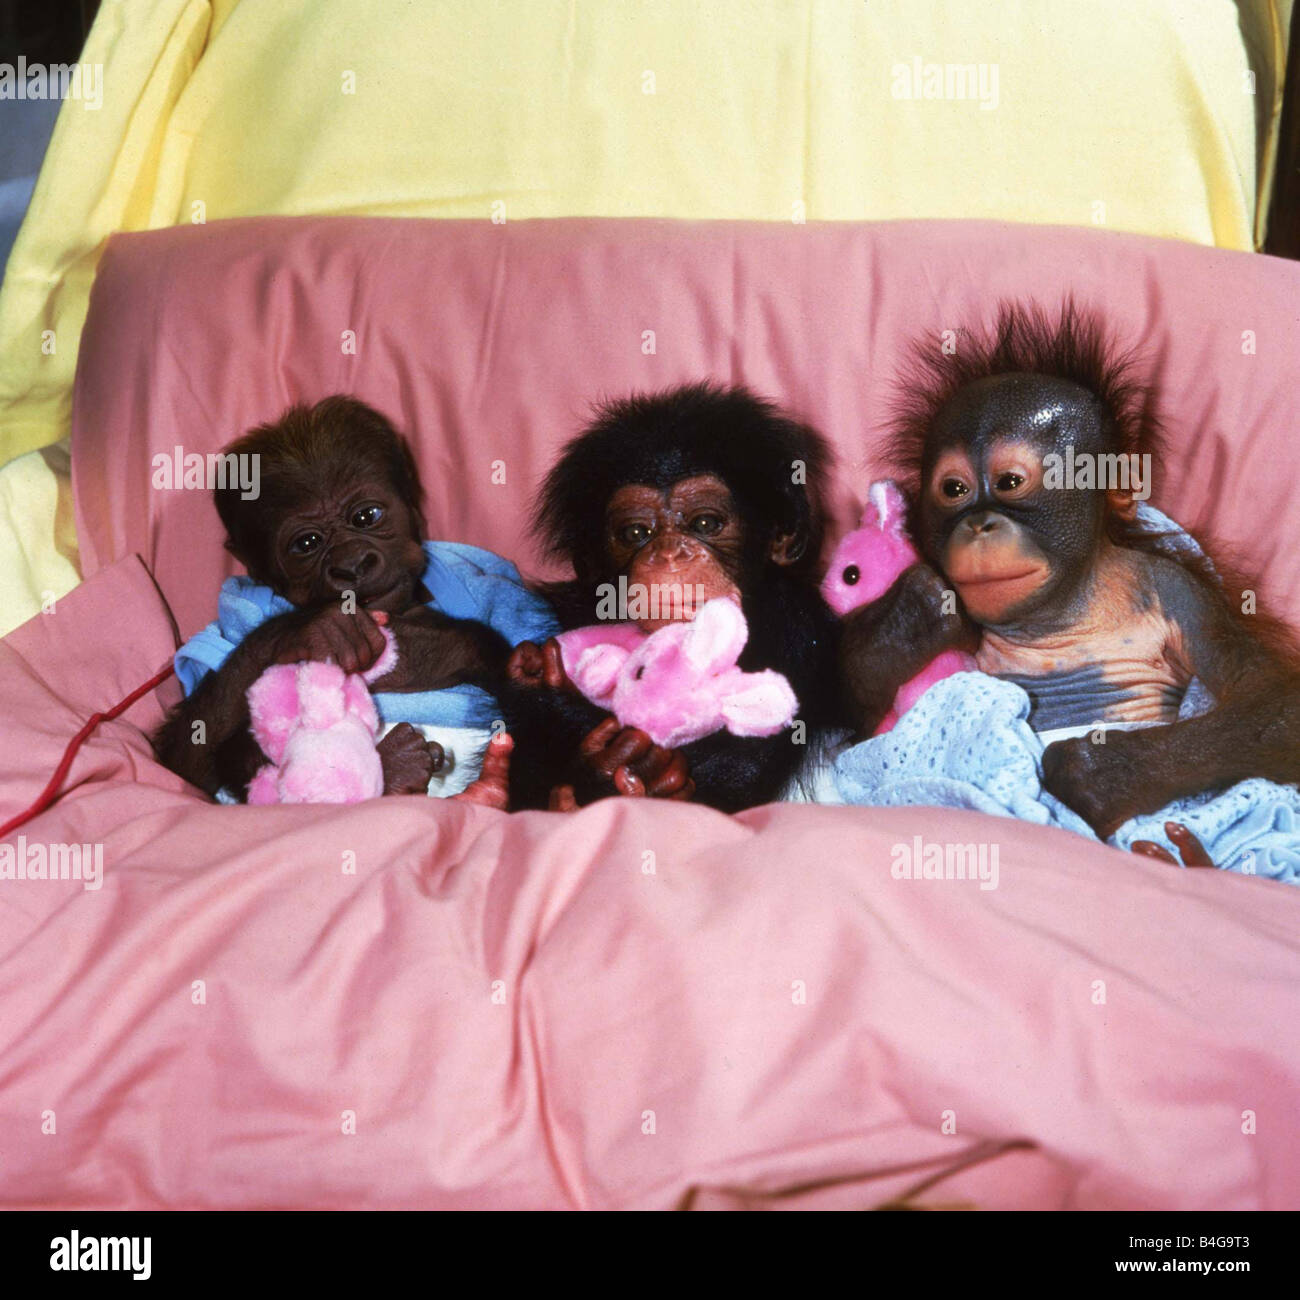 Abandoned baby apes in bed together with pink cuddly rabbit stuffed toys Asante the gorilla becky the chimp and Lee the orang utan Twycross Zoo Leeds June 1985 Mirrorpix Stock Photo